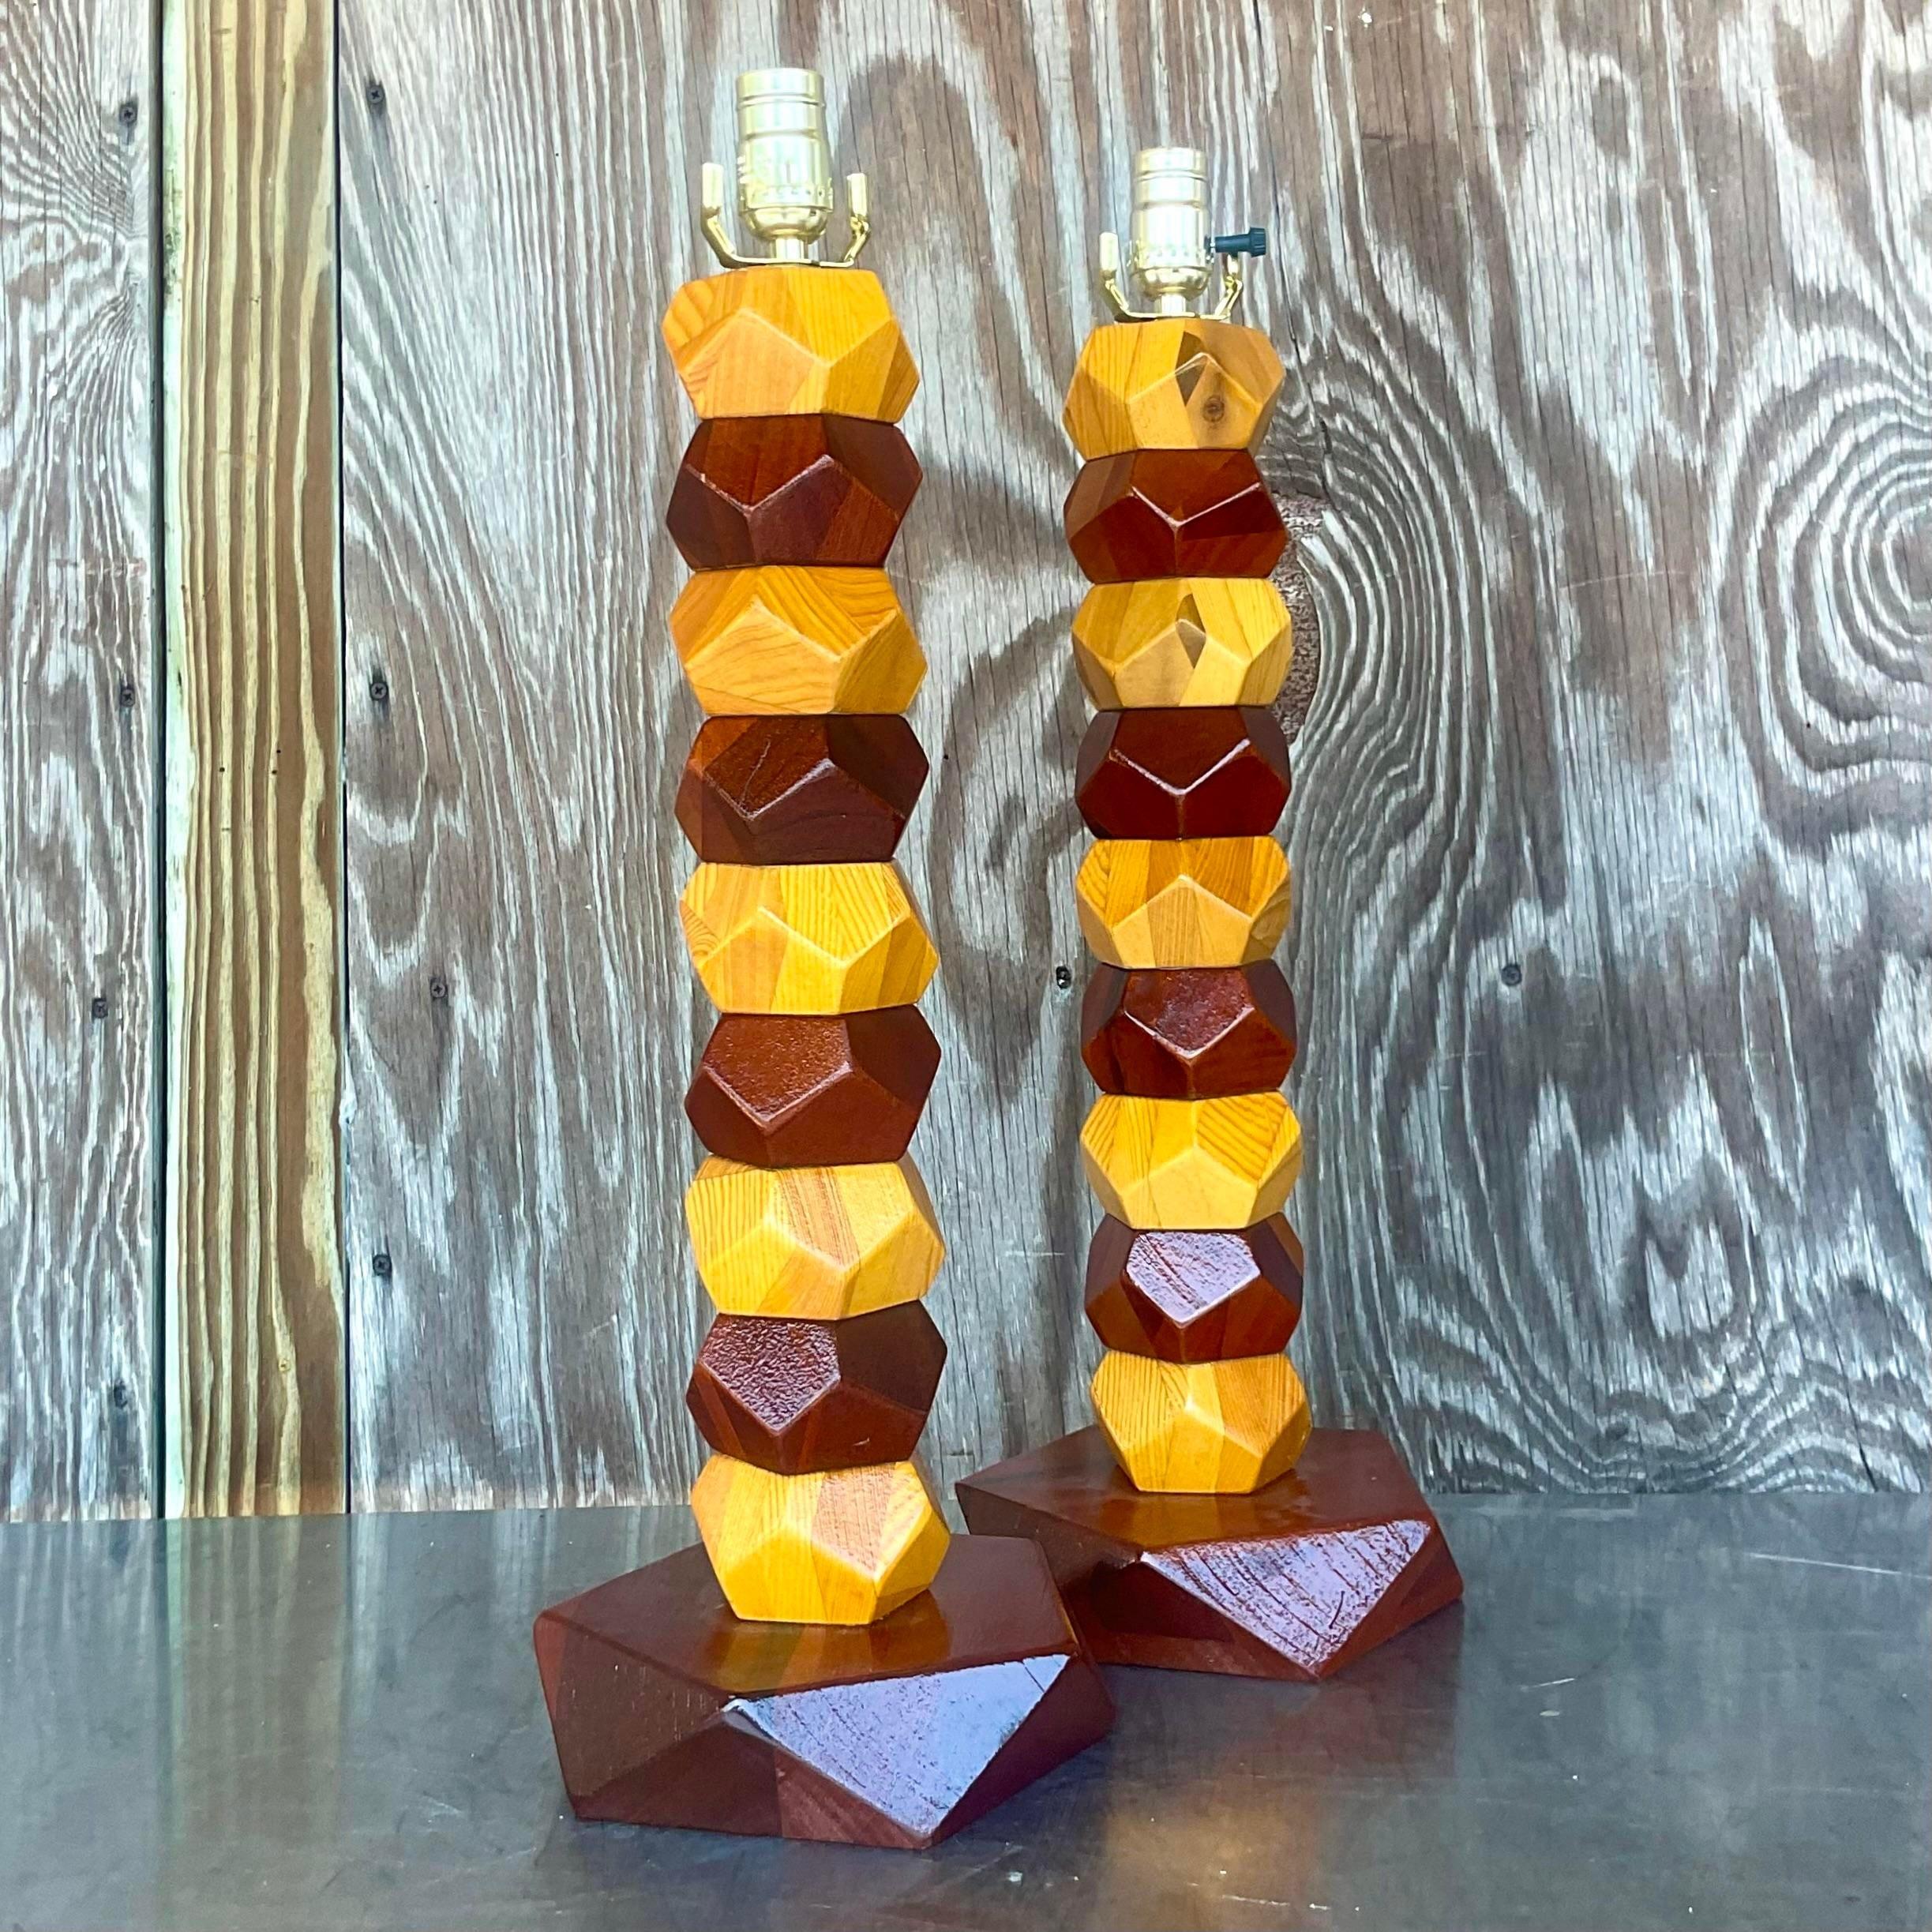 Vintage Boho Stacked Faceted Wood Block Lamps - a Pair In Good Condition For Sale In west palm beach, FL